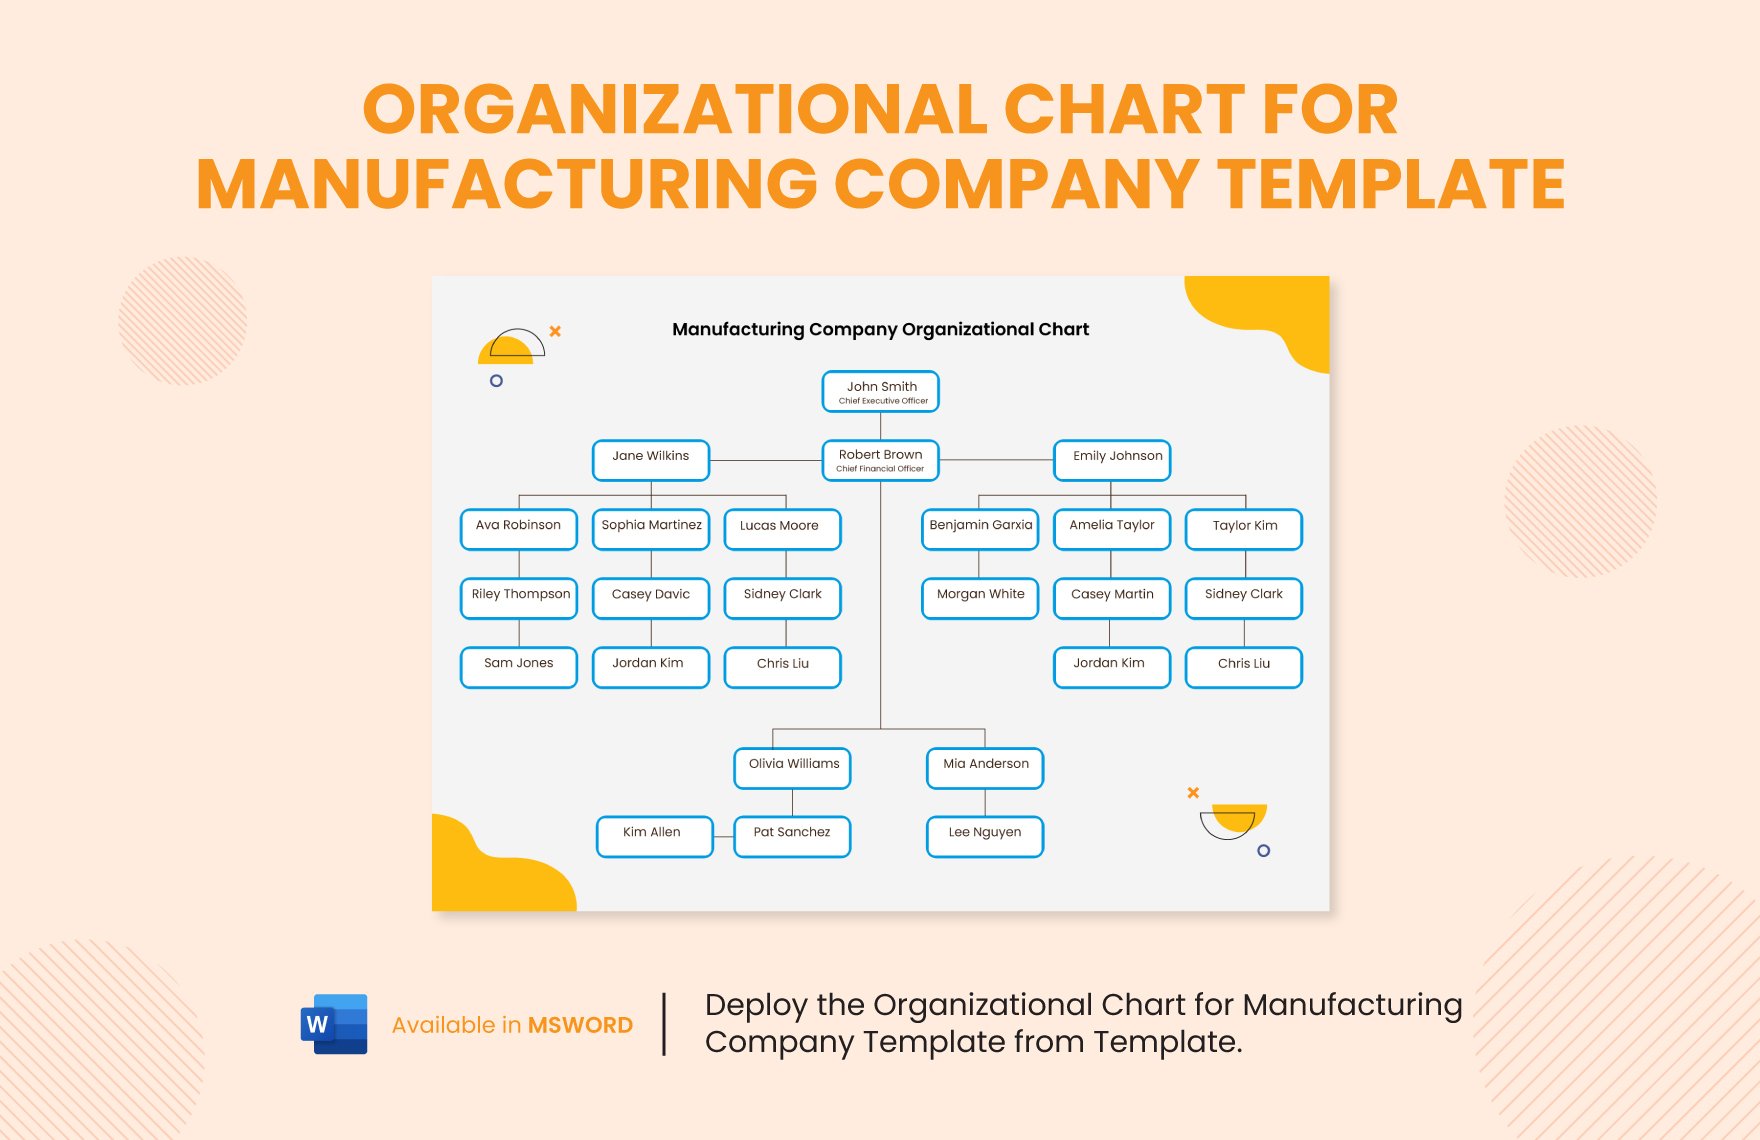 Organizational Chart for Manufacturing Company Template